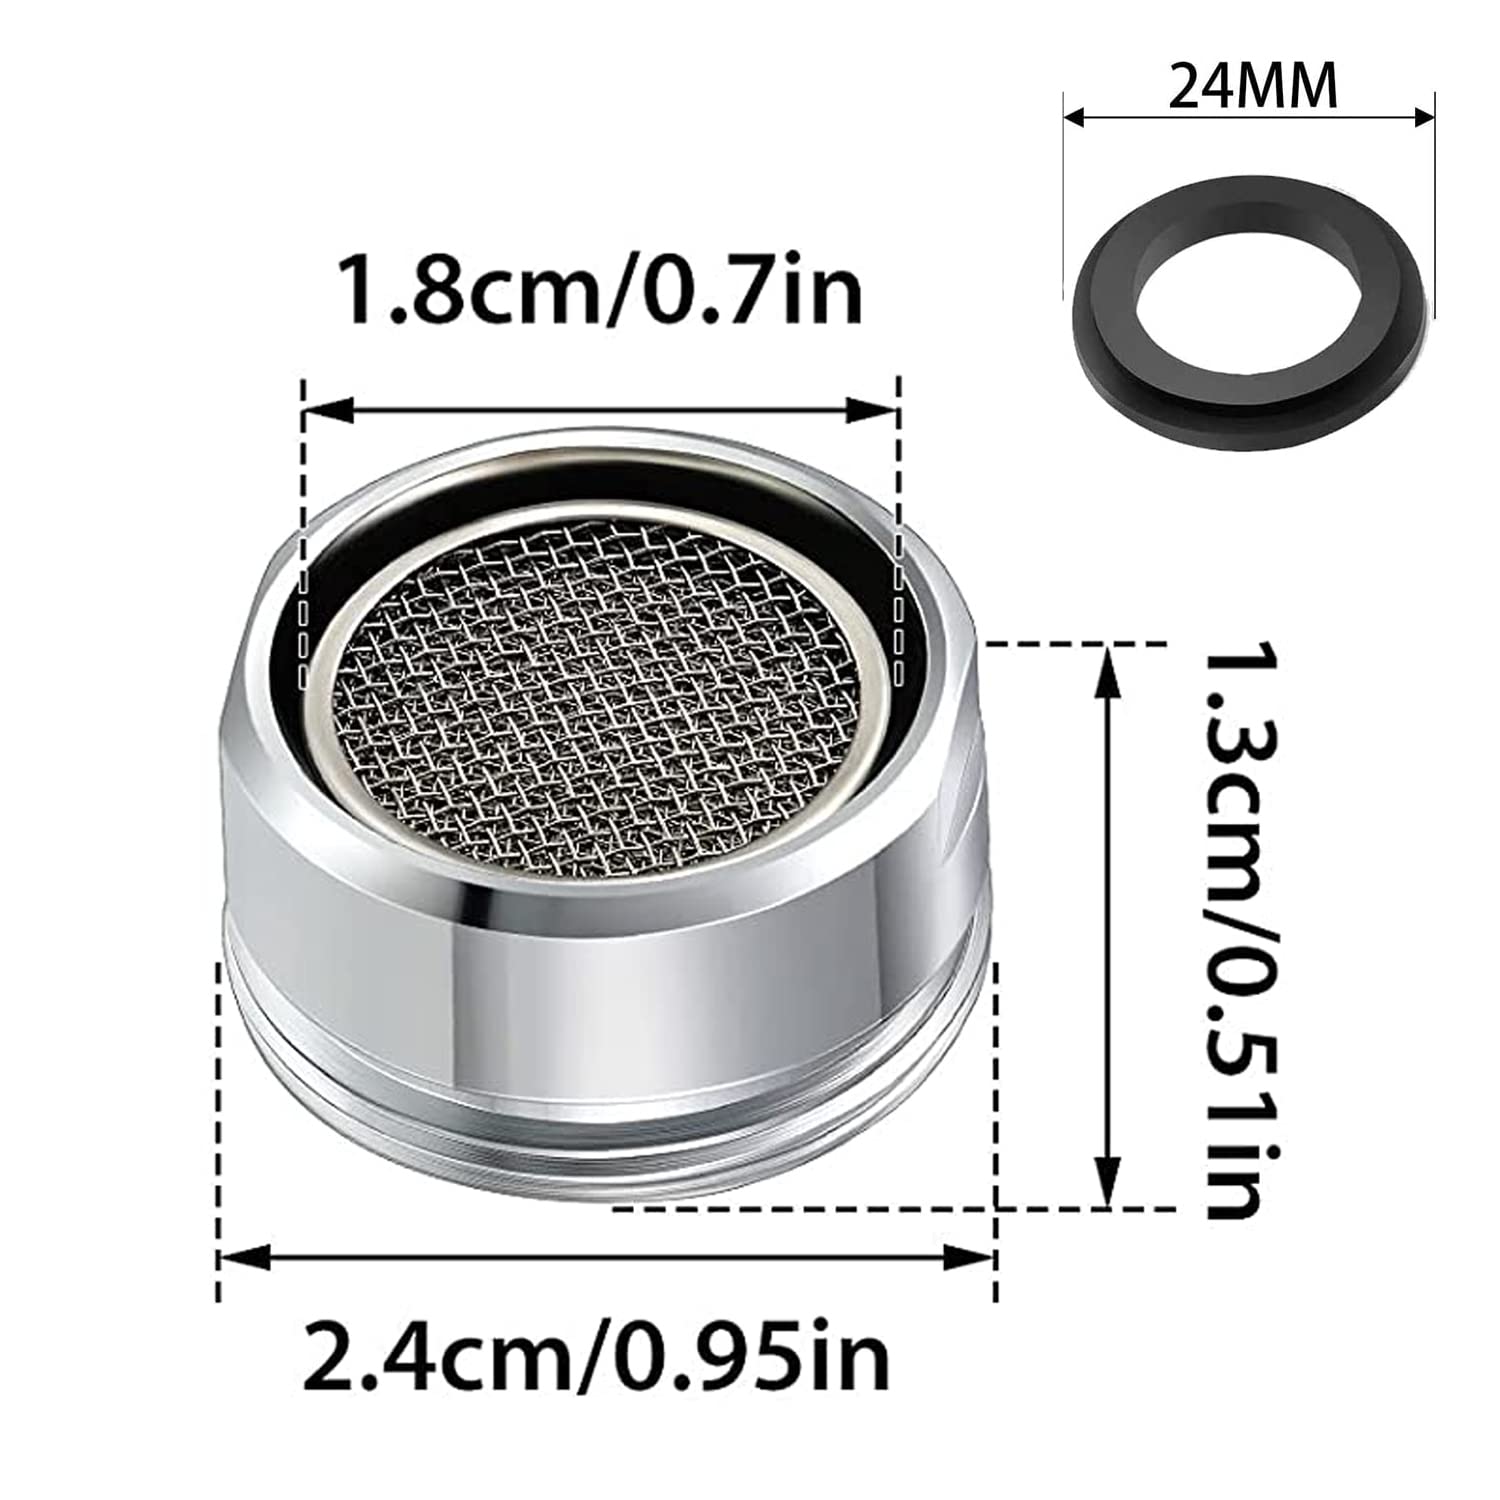 Faucet Aerator Kitchen Sink Aerator Replacement Parts, 15/16-Inch or 24mm Male Thread Aerator Faucet Filter with Gasket For Kitchen, Bathroom (Silver, 6 PCS)